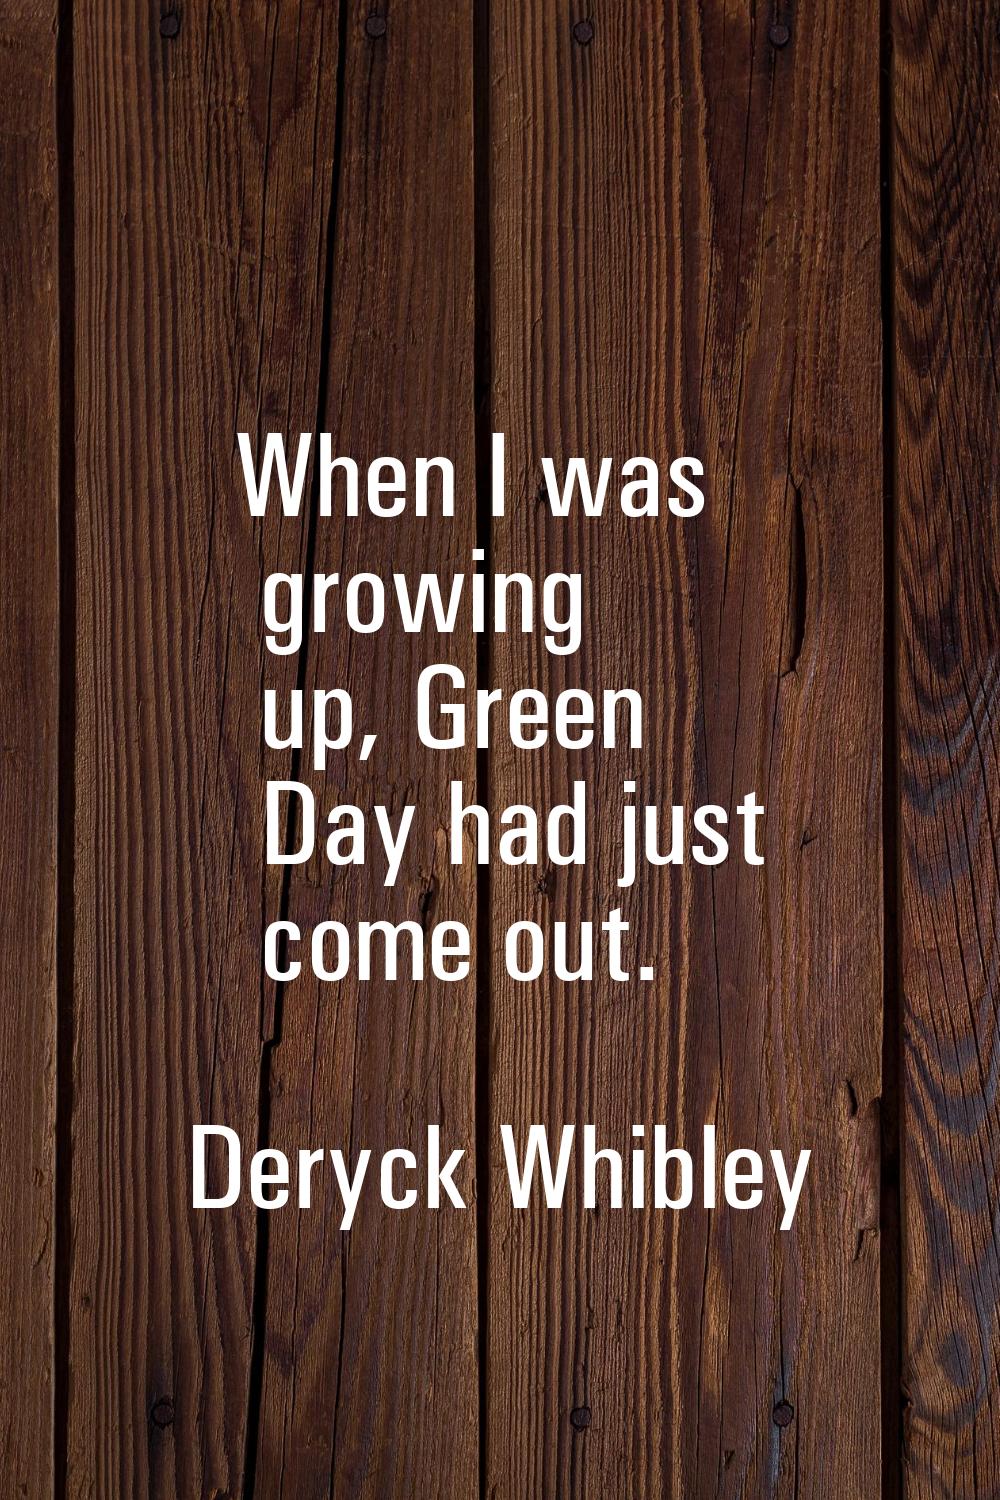 When I was growing up, Green Day had just come out.